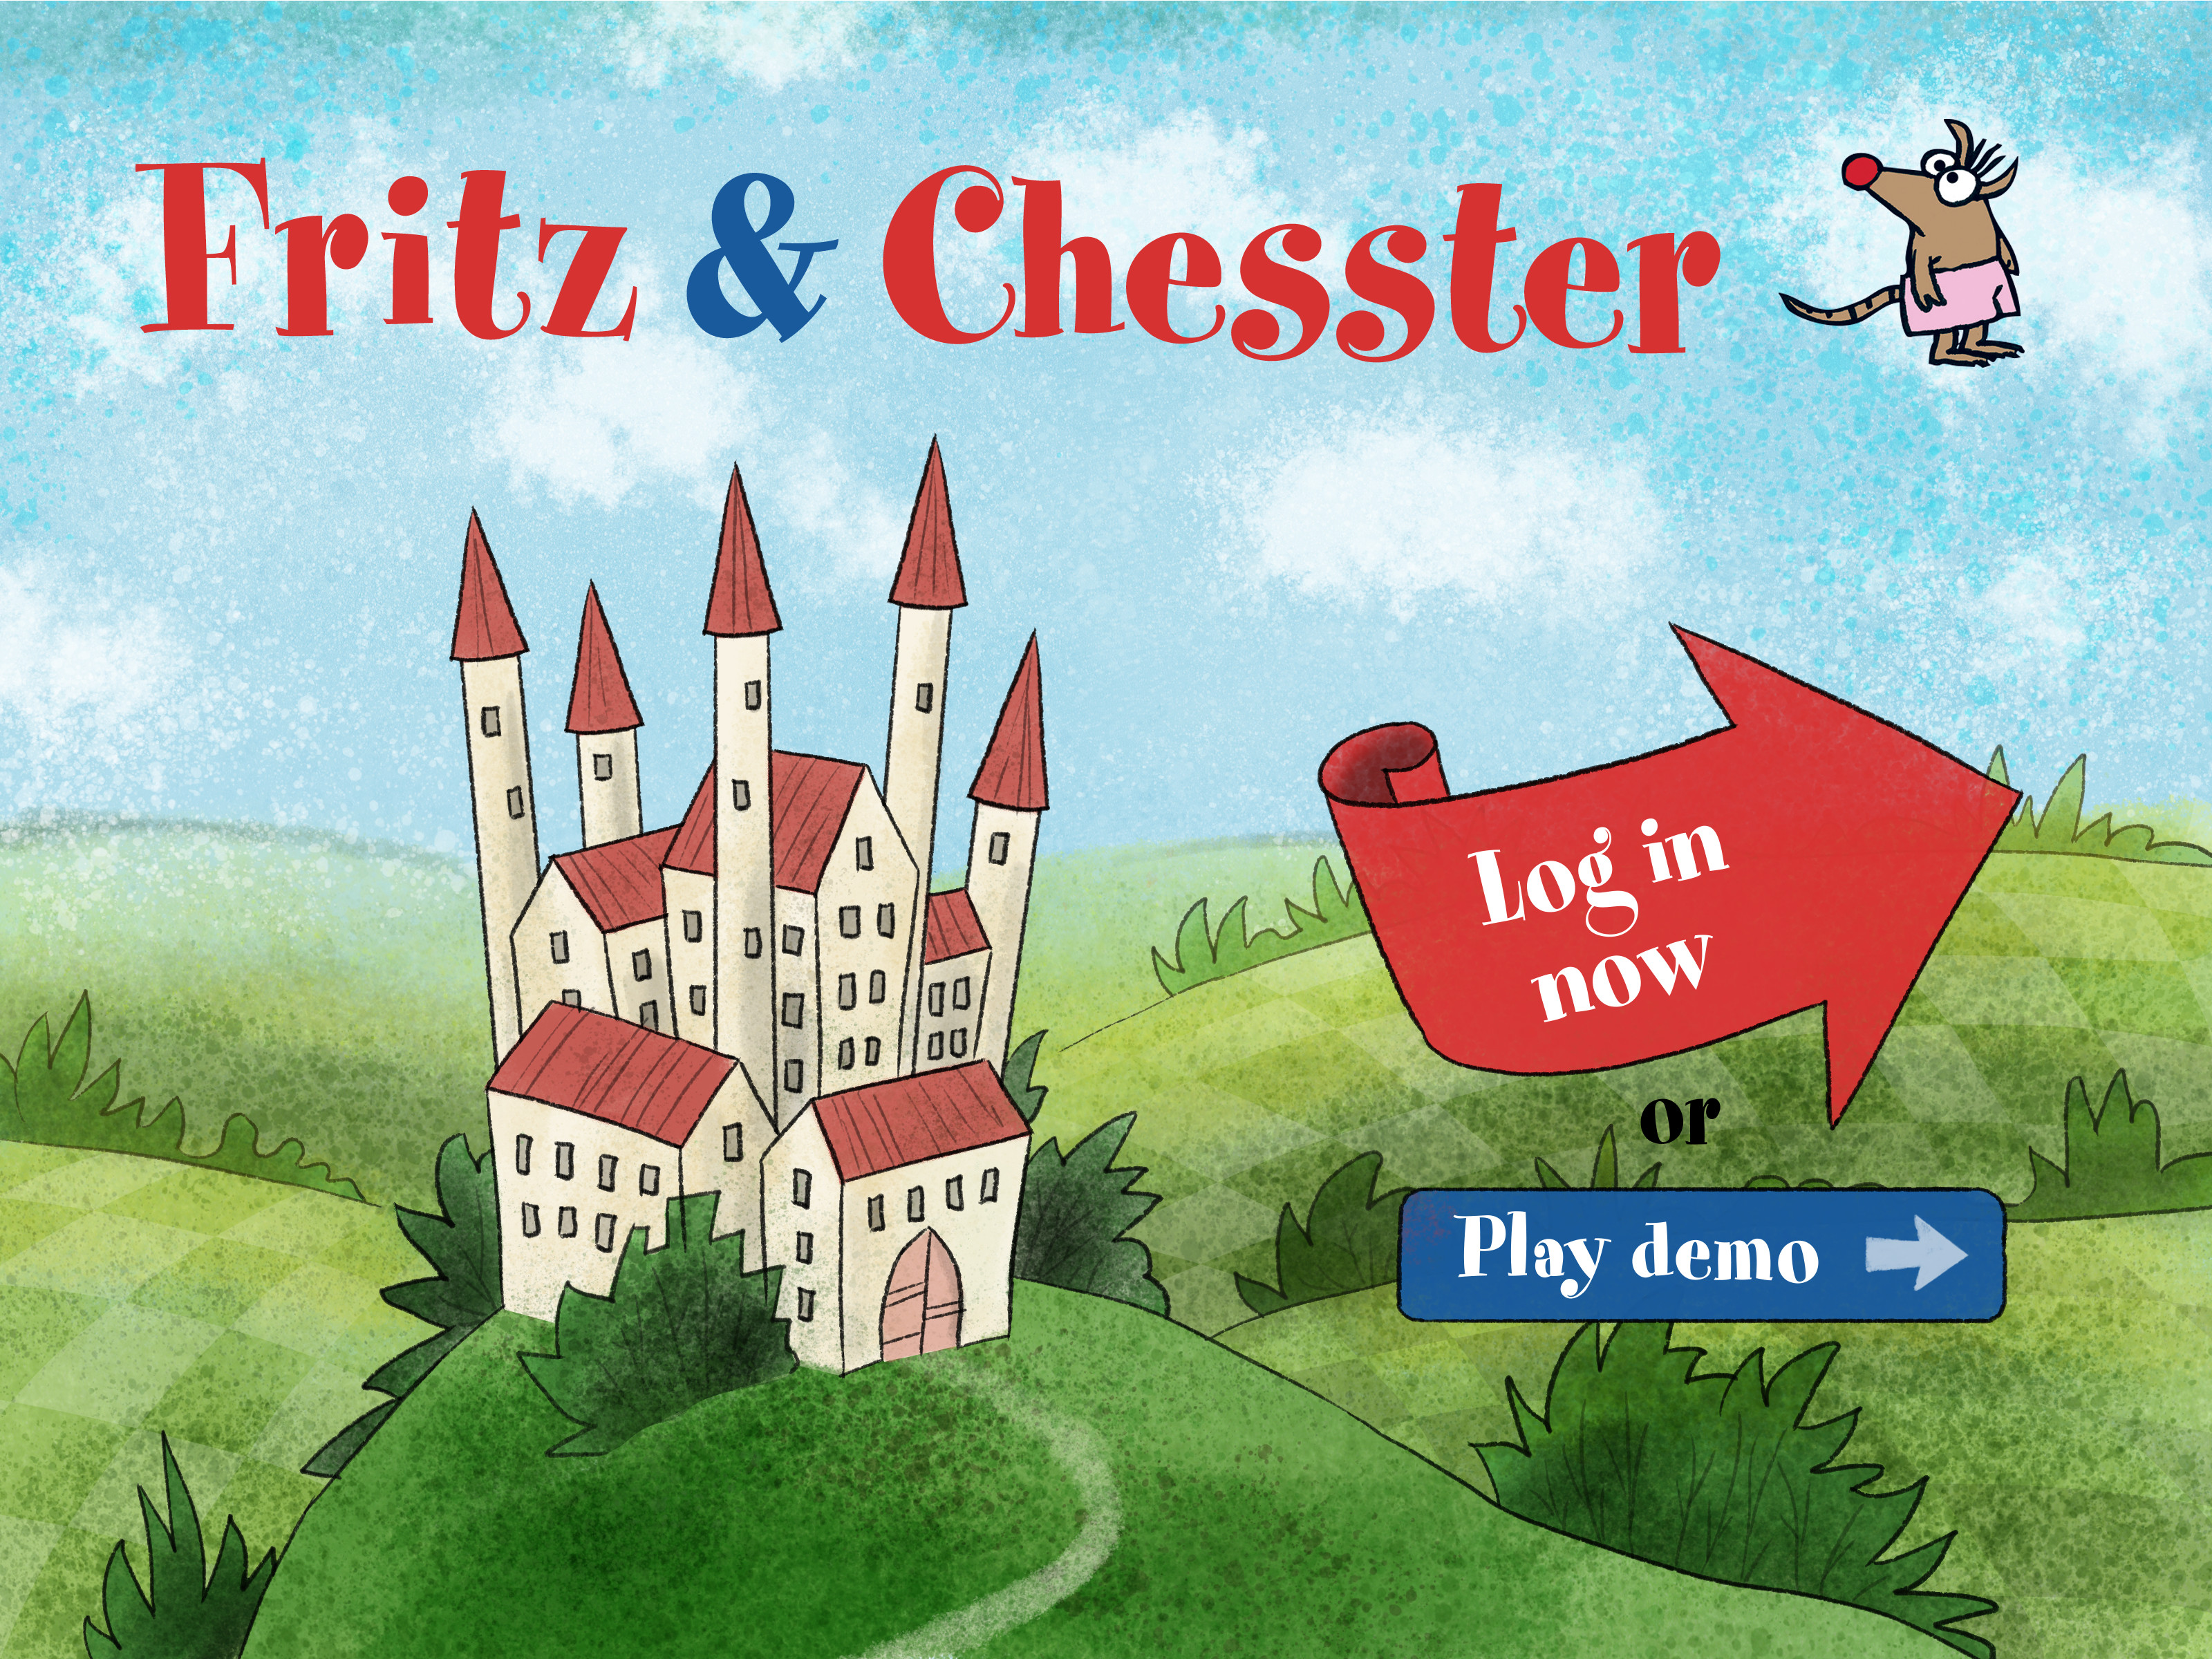 FRITZ 6 + PLAY CHESS ONLINE CHESSBASE PC USED PAL ITALIAN FR1 70085